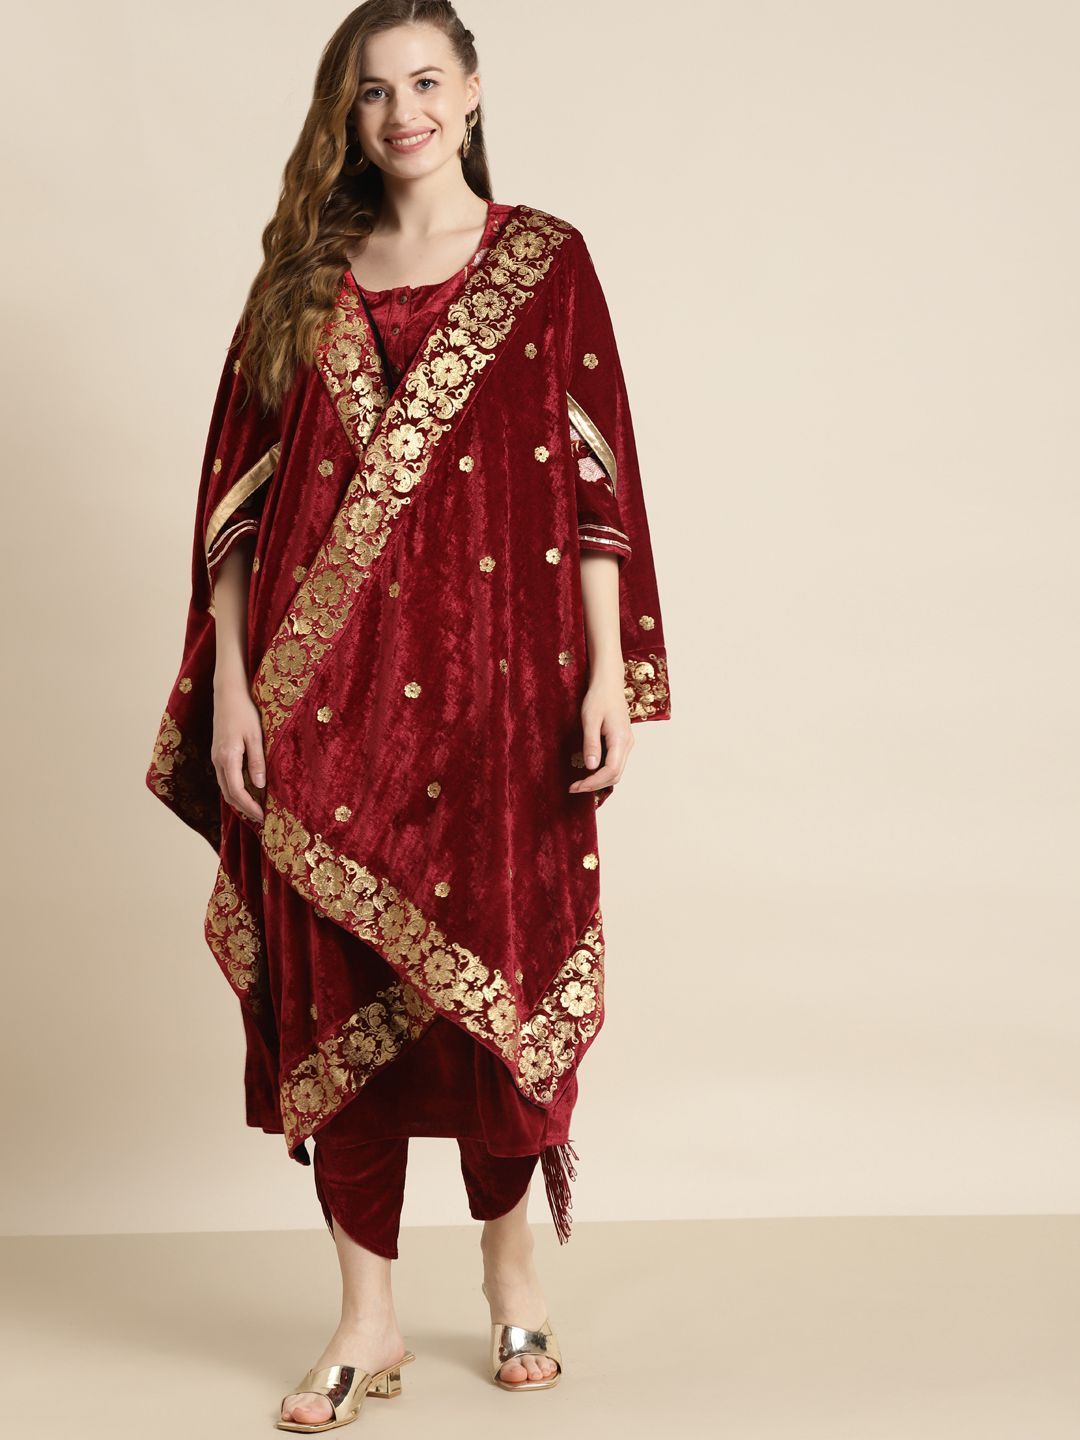 Shae by SASSAFRAS Women Maroon & Gold-Toned Printed Velvet Foil Print Cape Jacket Price in India